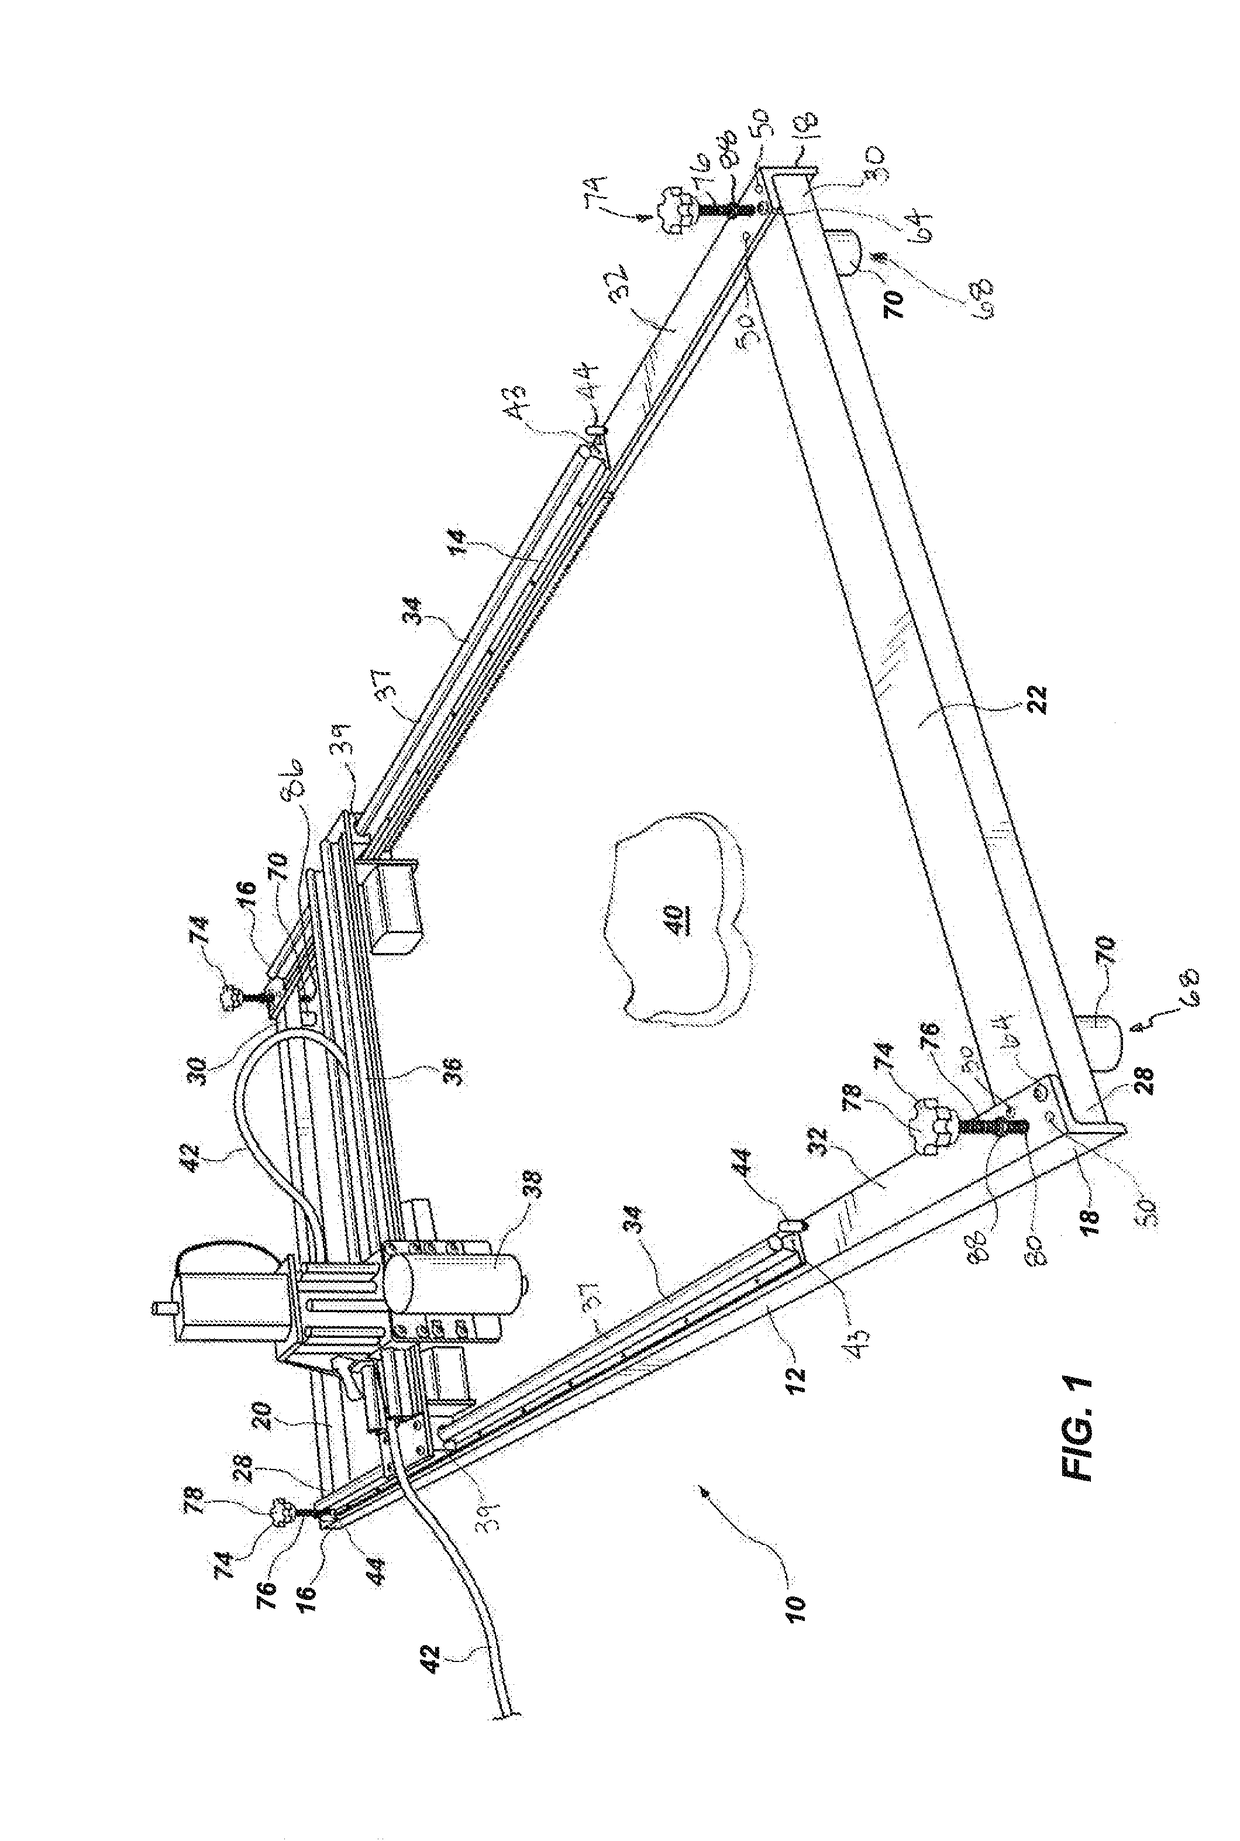 Portable rail system for mounting an engraving device